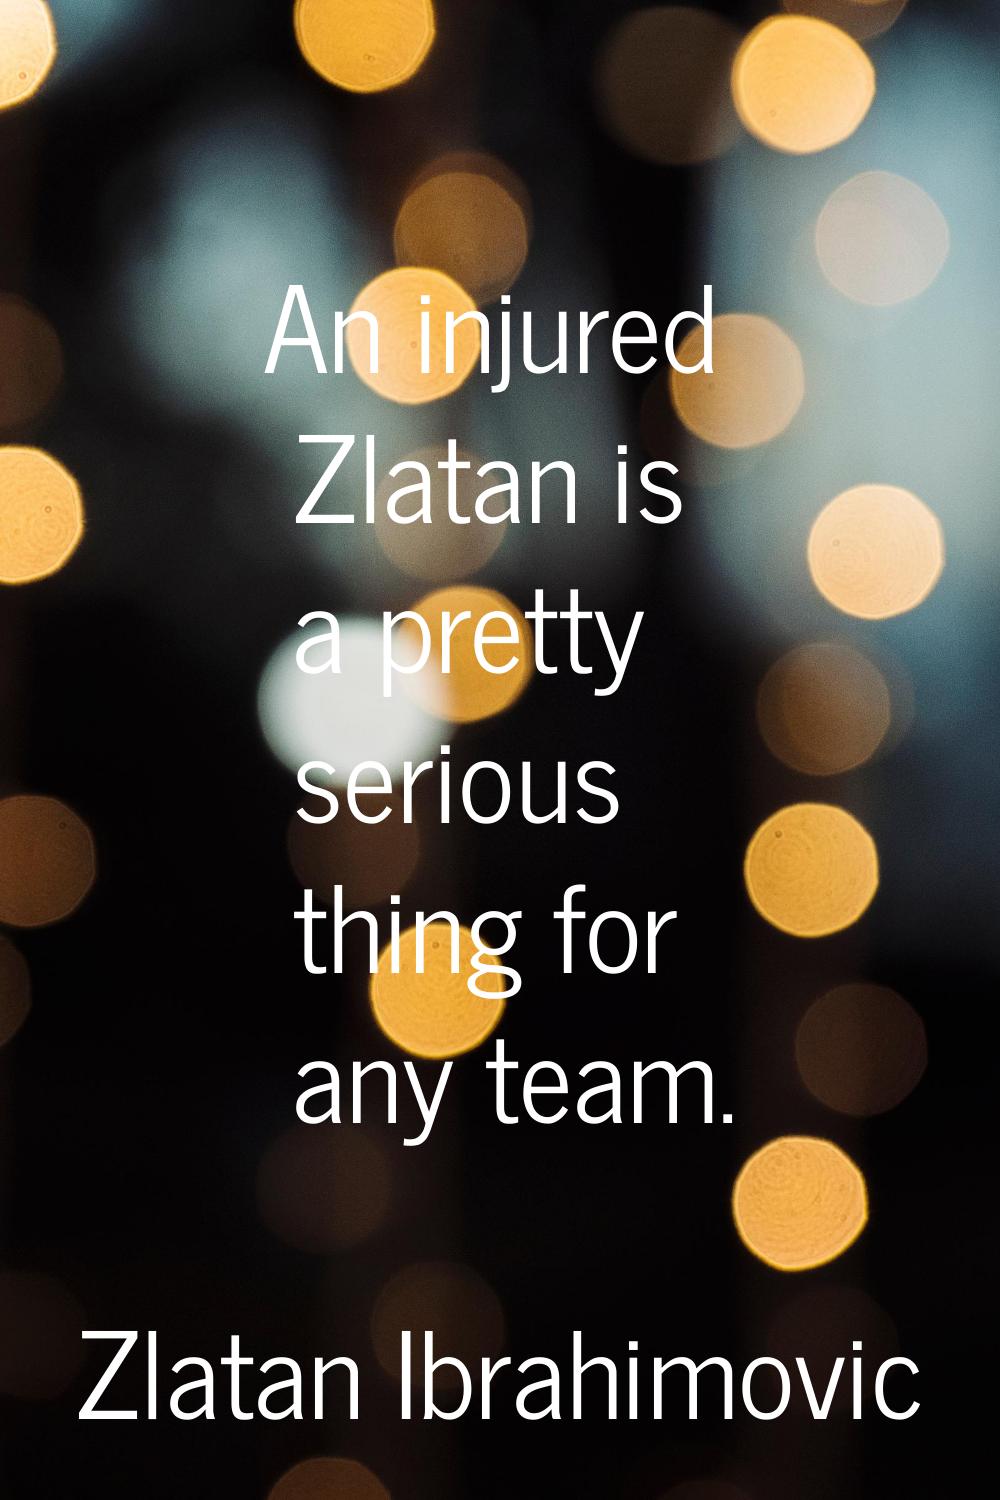 An injured Zlatan is a pretty serious thing for any team.